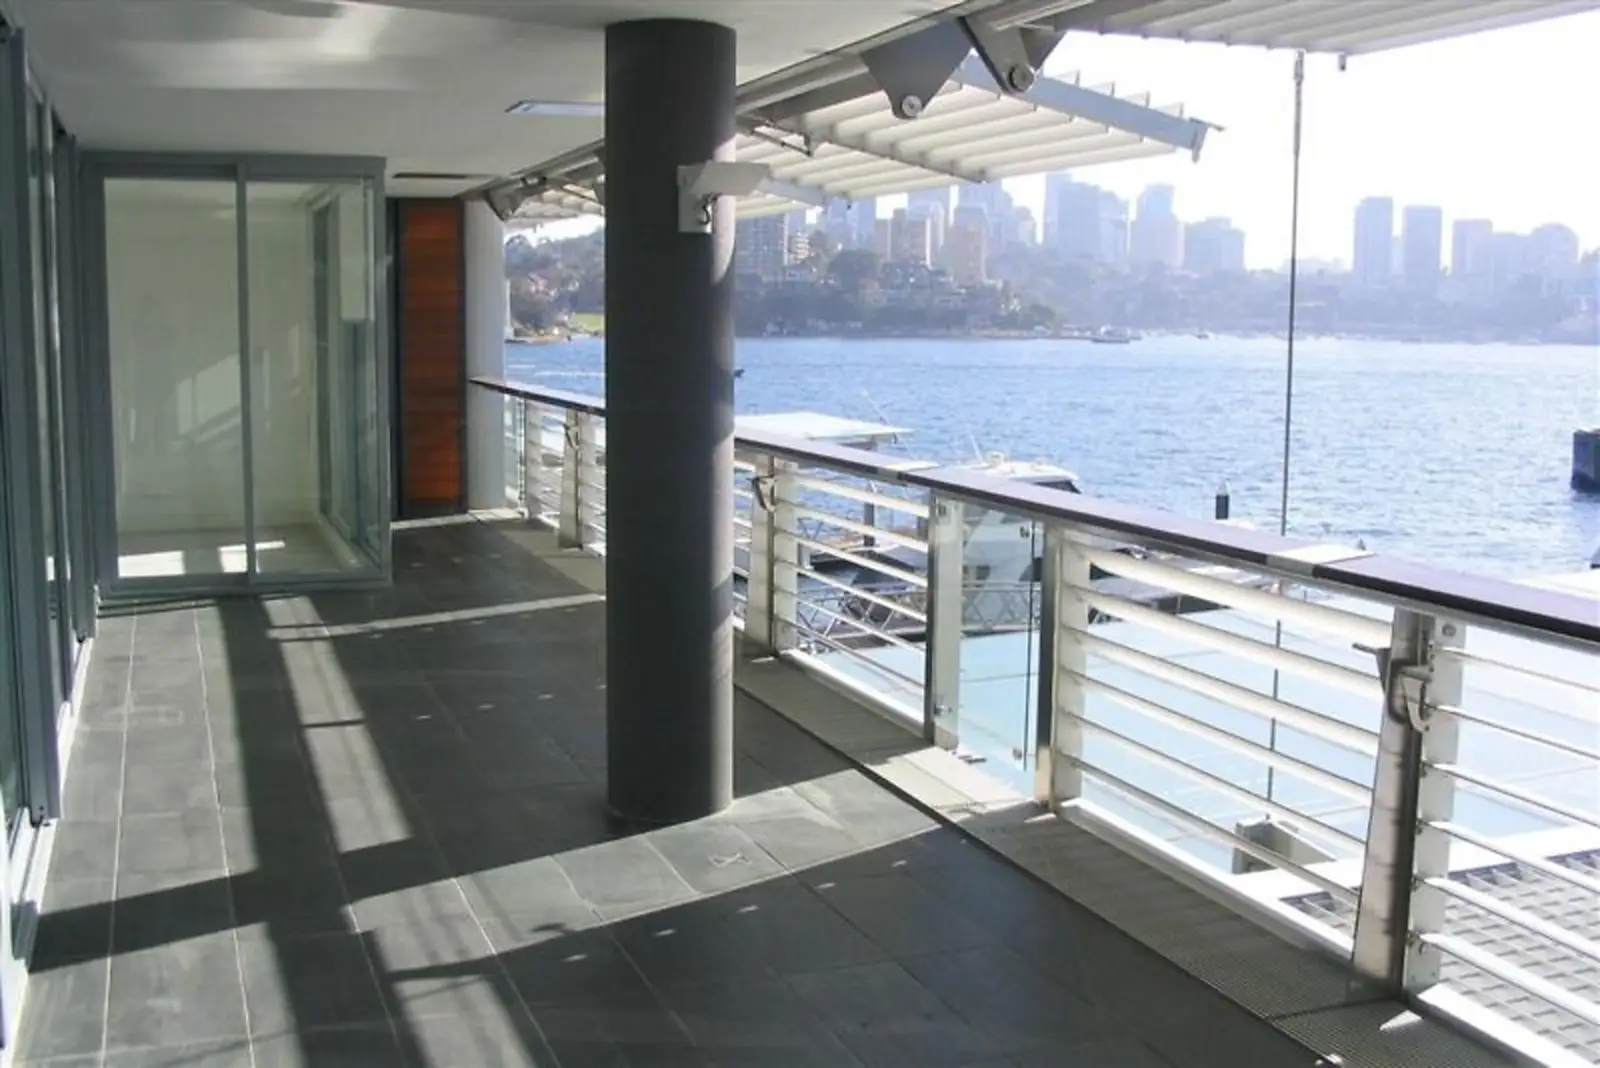 Photo #1: 326/19 Hickson Road, Walsh Bay - Sold by Sydney Sotheby's International Realty